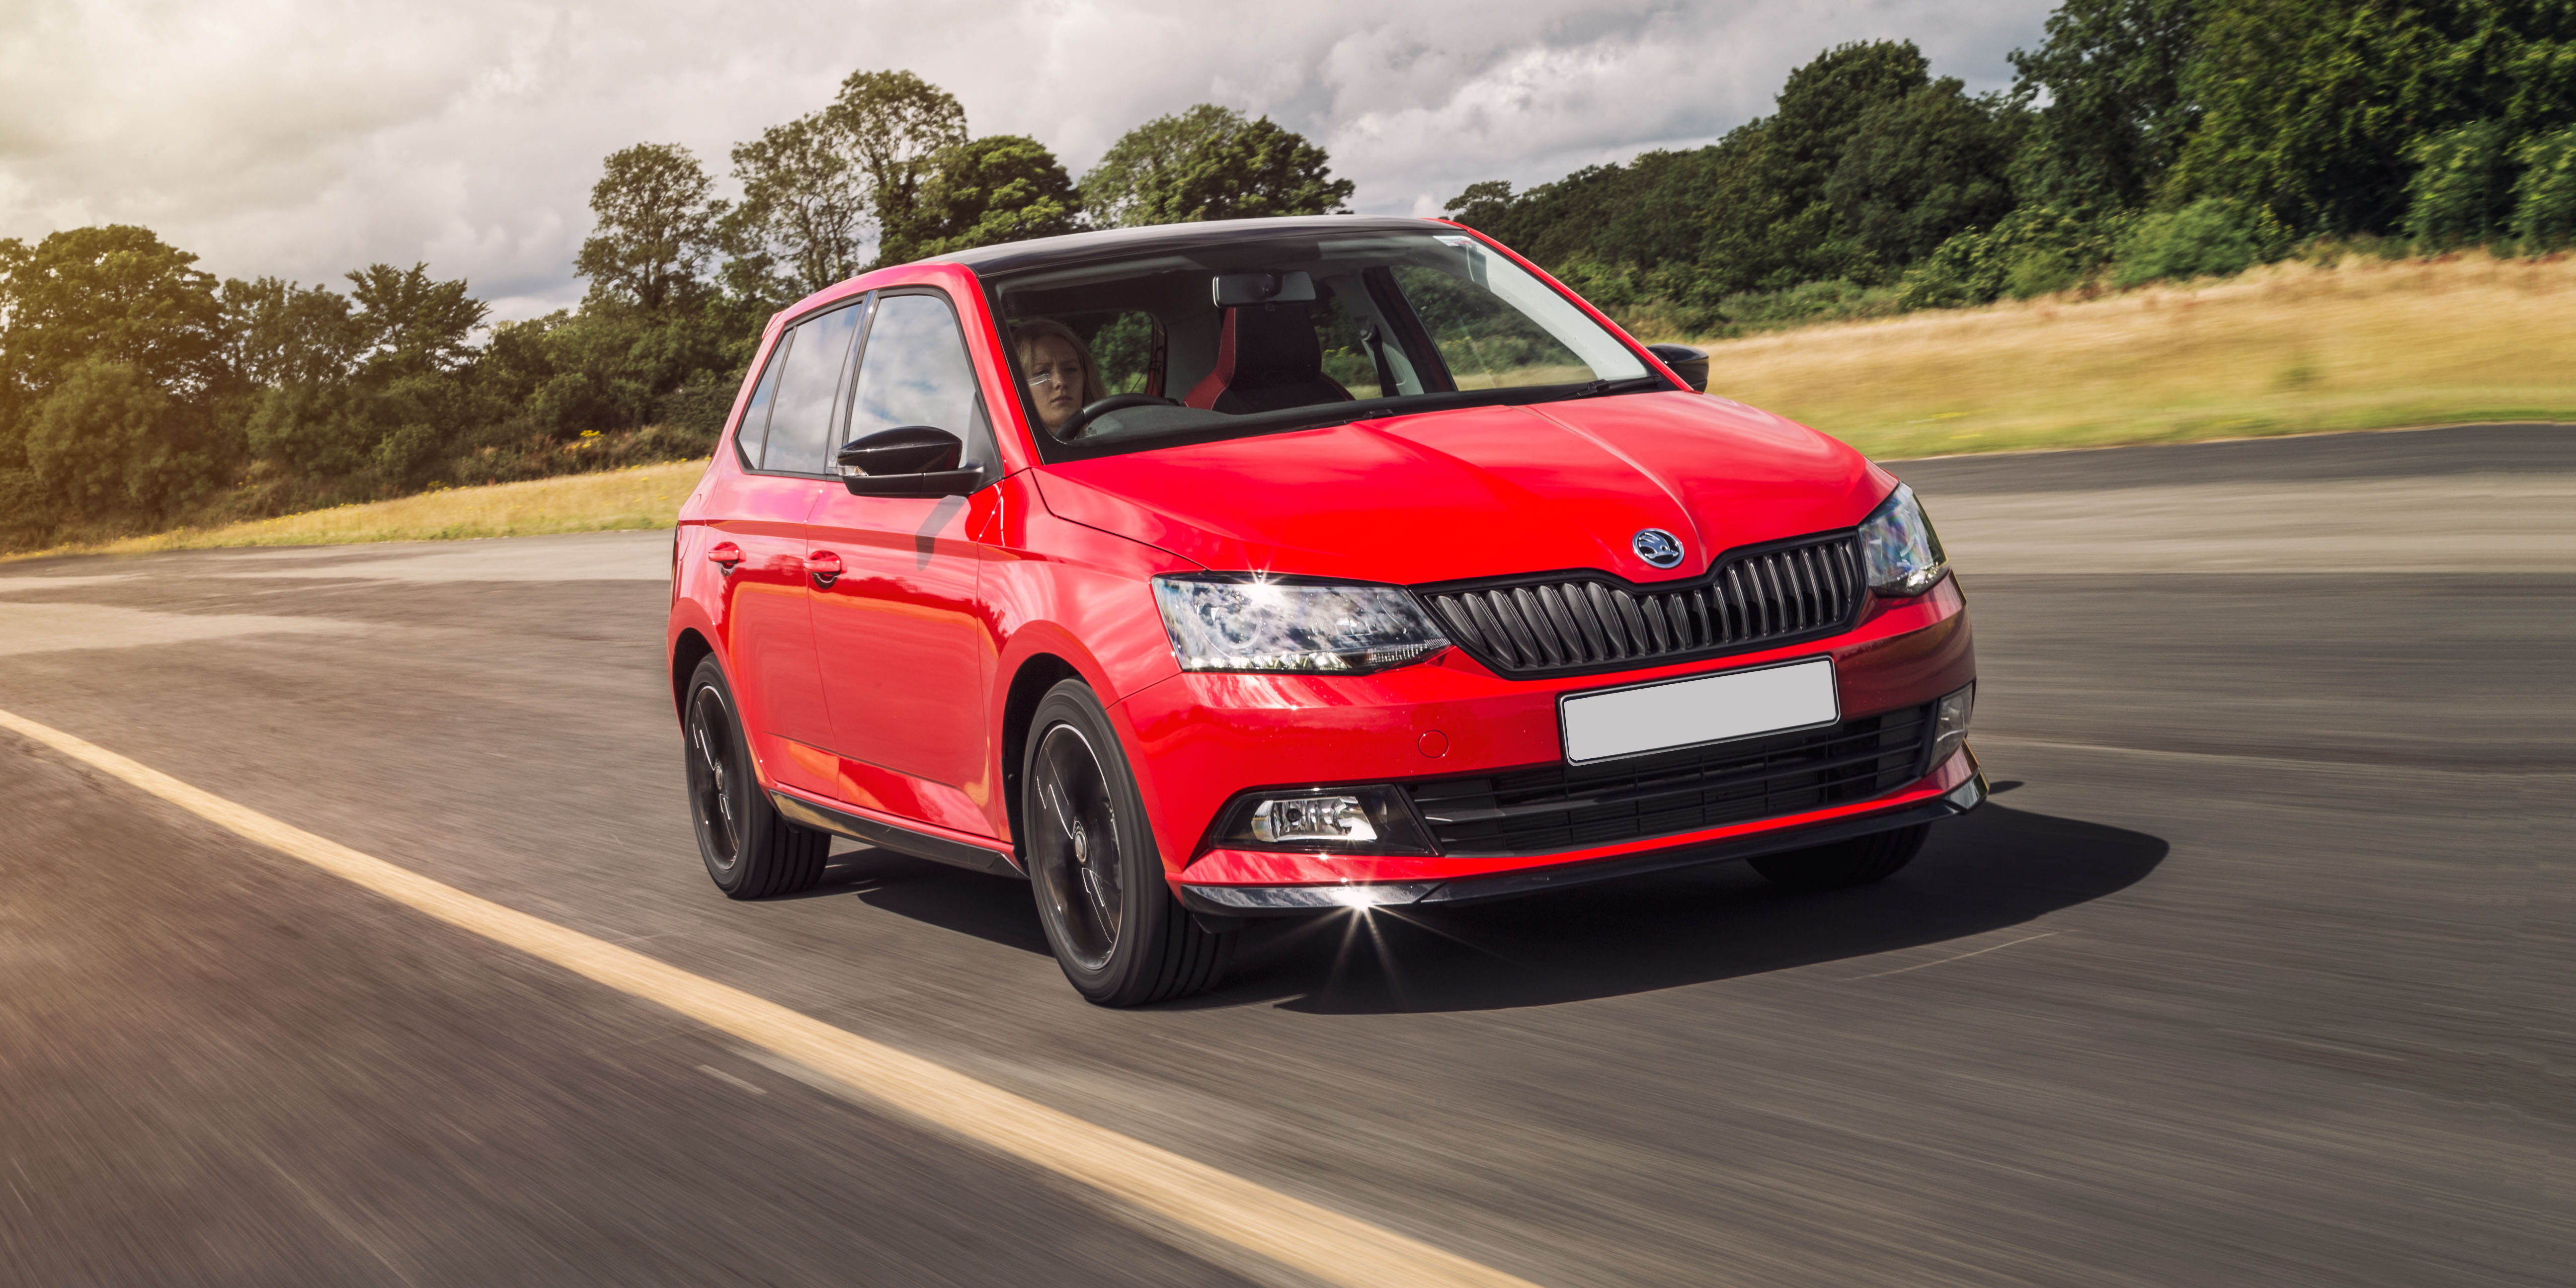 New Skoda Fabia (2015-2017) Review, Drive, Specs & Pricing